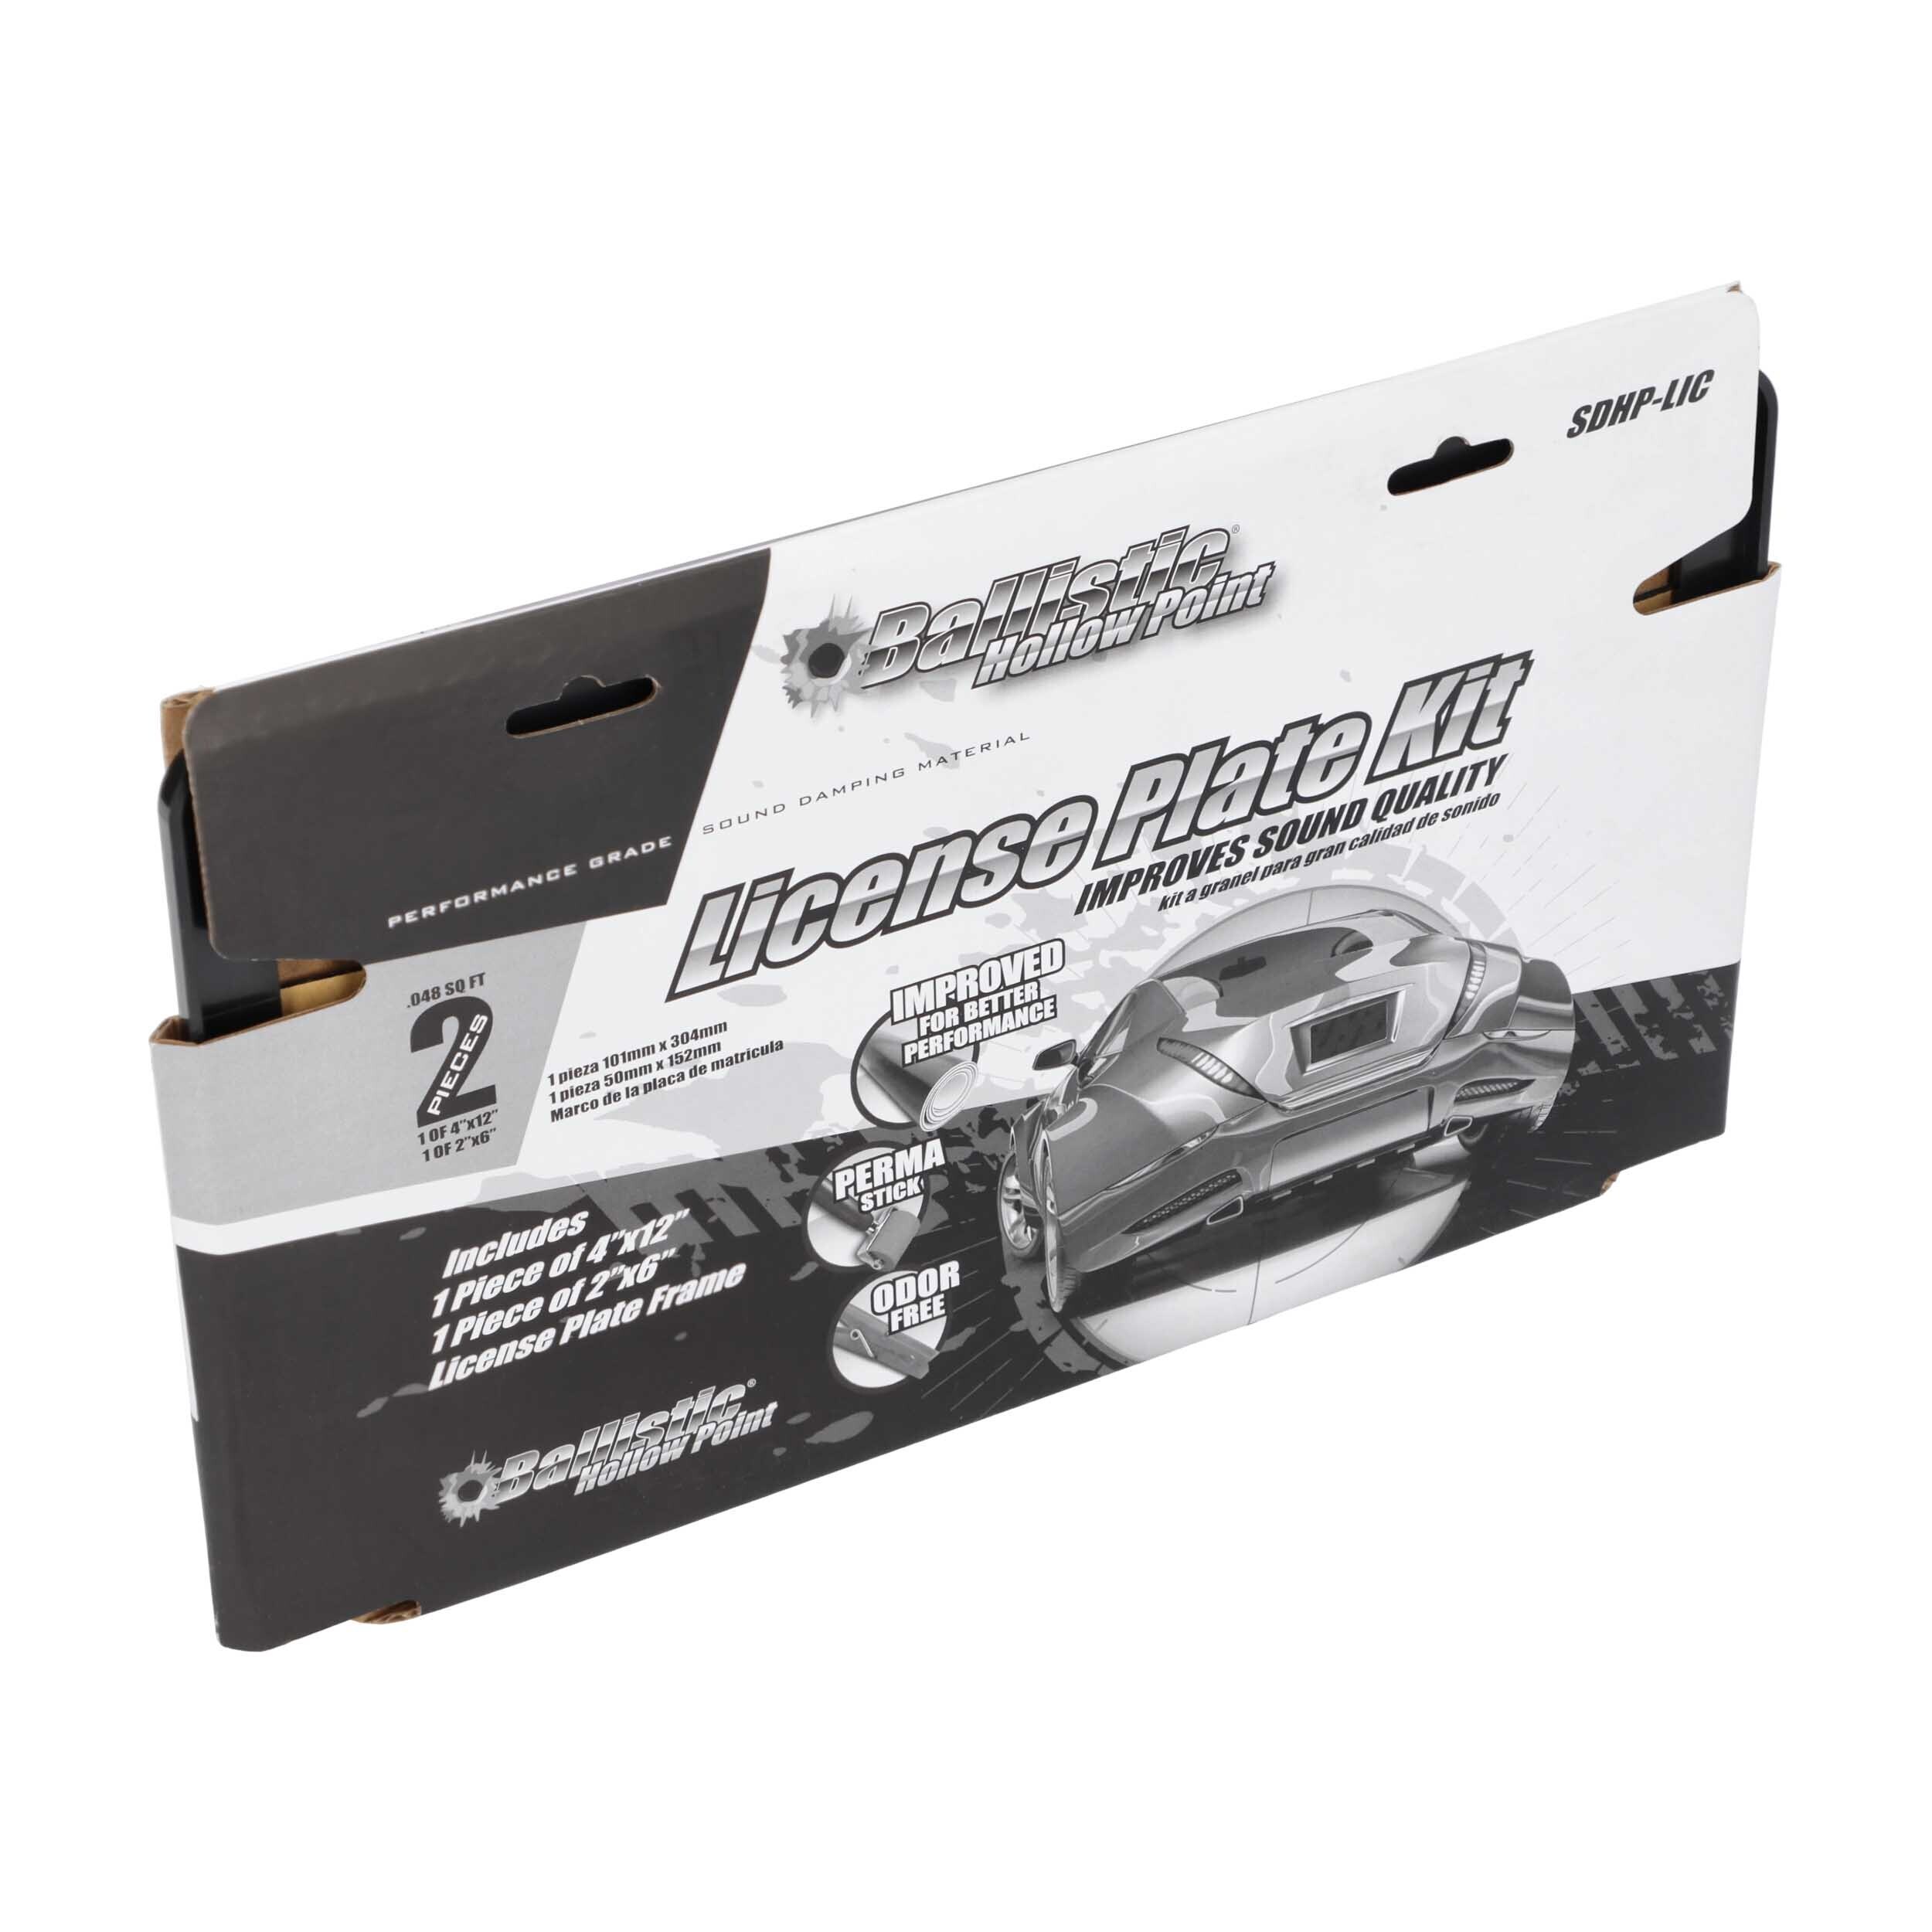 LICENSE PLATE KIT - Hollow Point Series